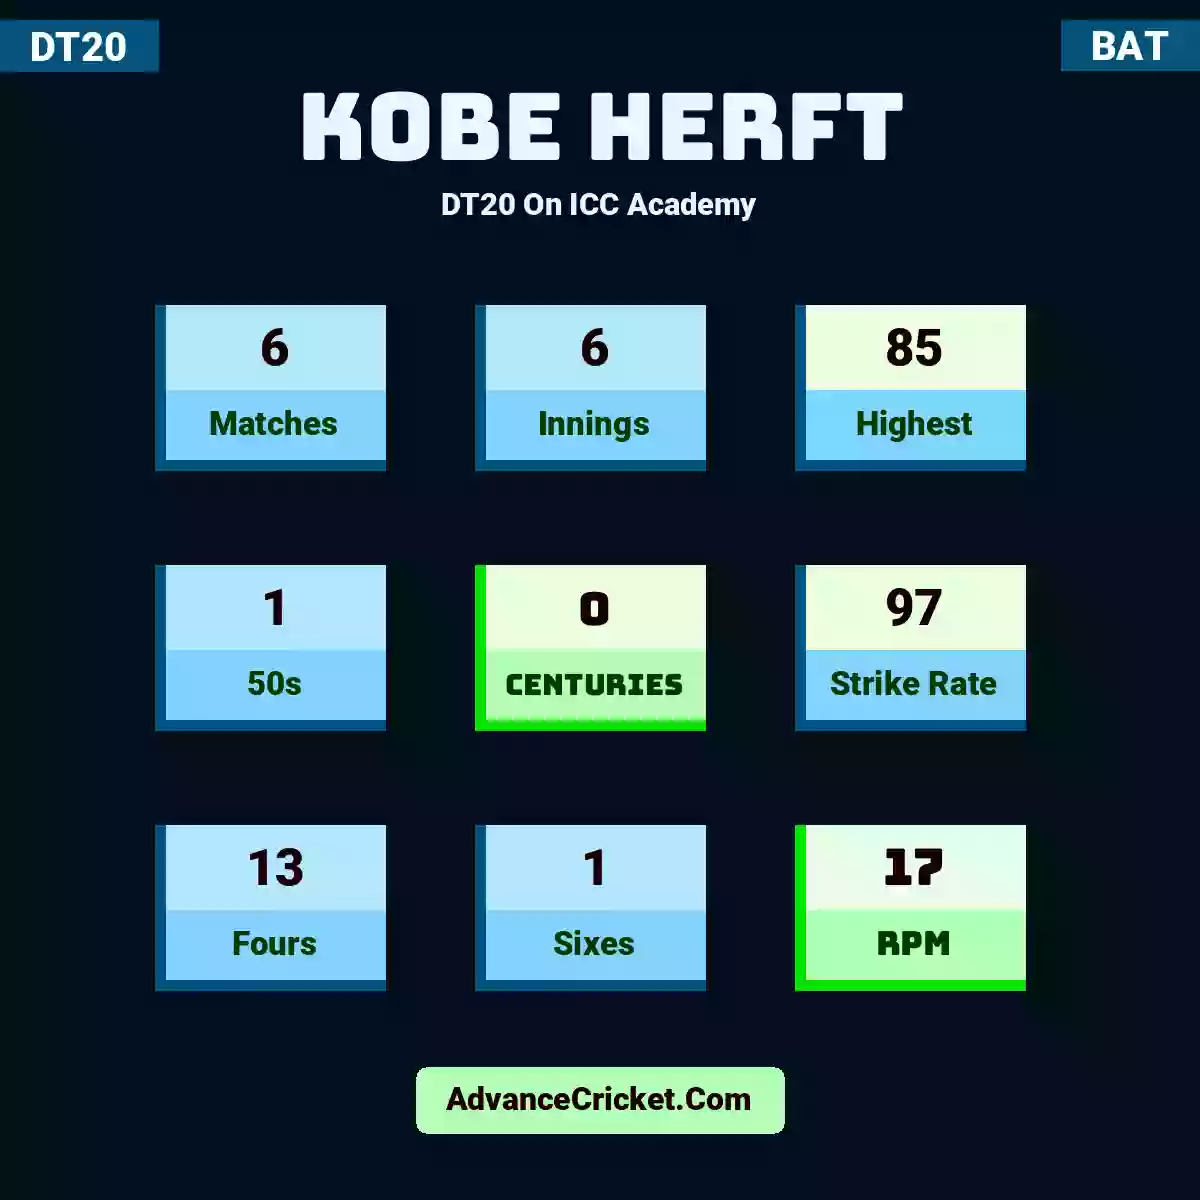 Kobe Herft DT20  On ICC Academy, Kobe Herft played 6 matches, scored 85 runs as highest, 1 half-centuries, and 0 centuries, with a strike rate of 97. K.Herft hit 13 fours and 1 sixes, with an RPM of 17.